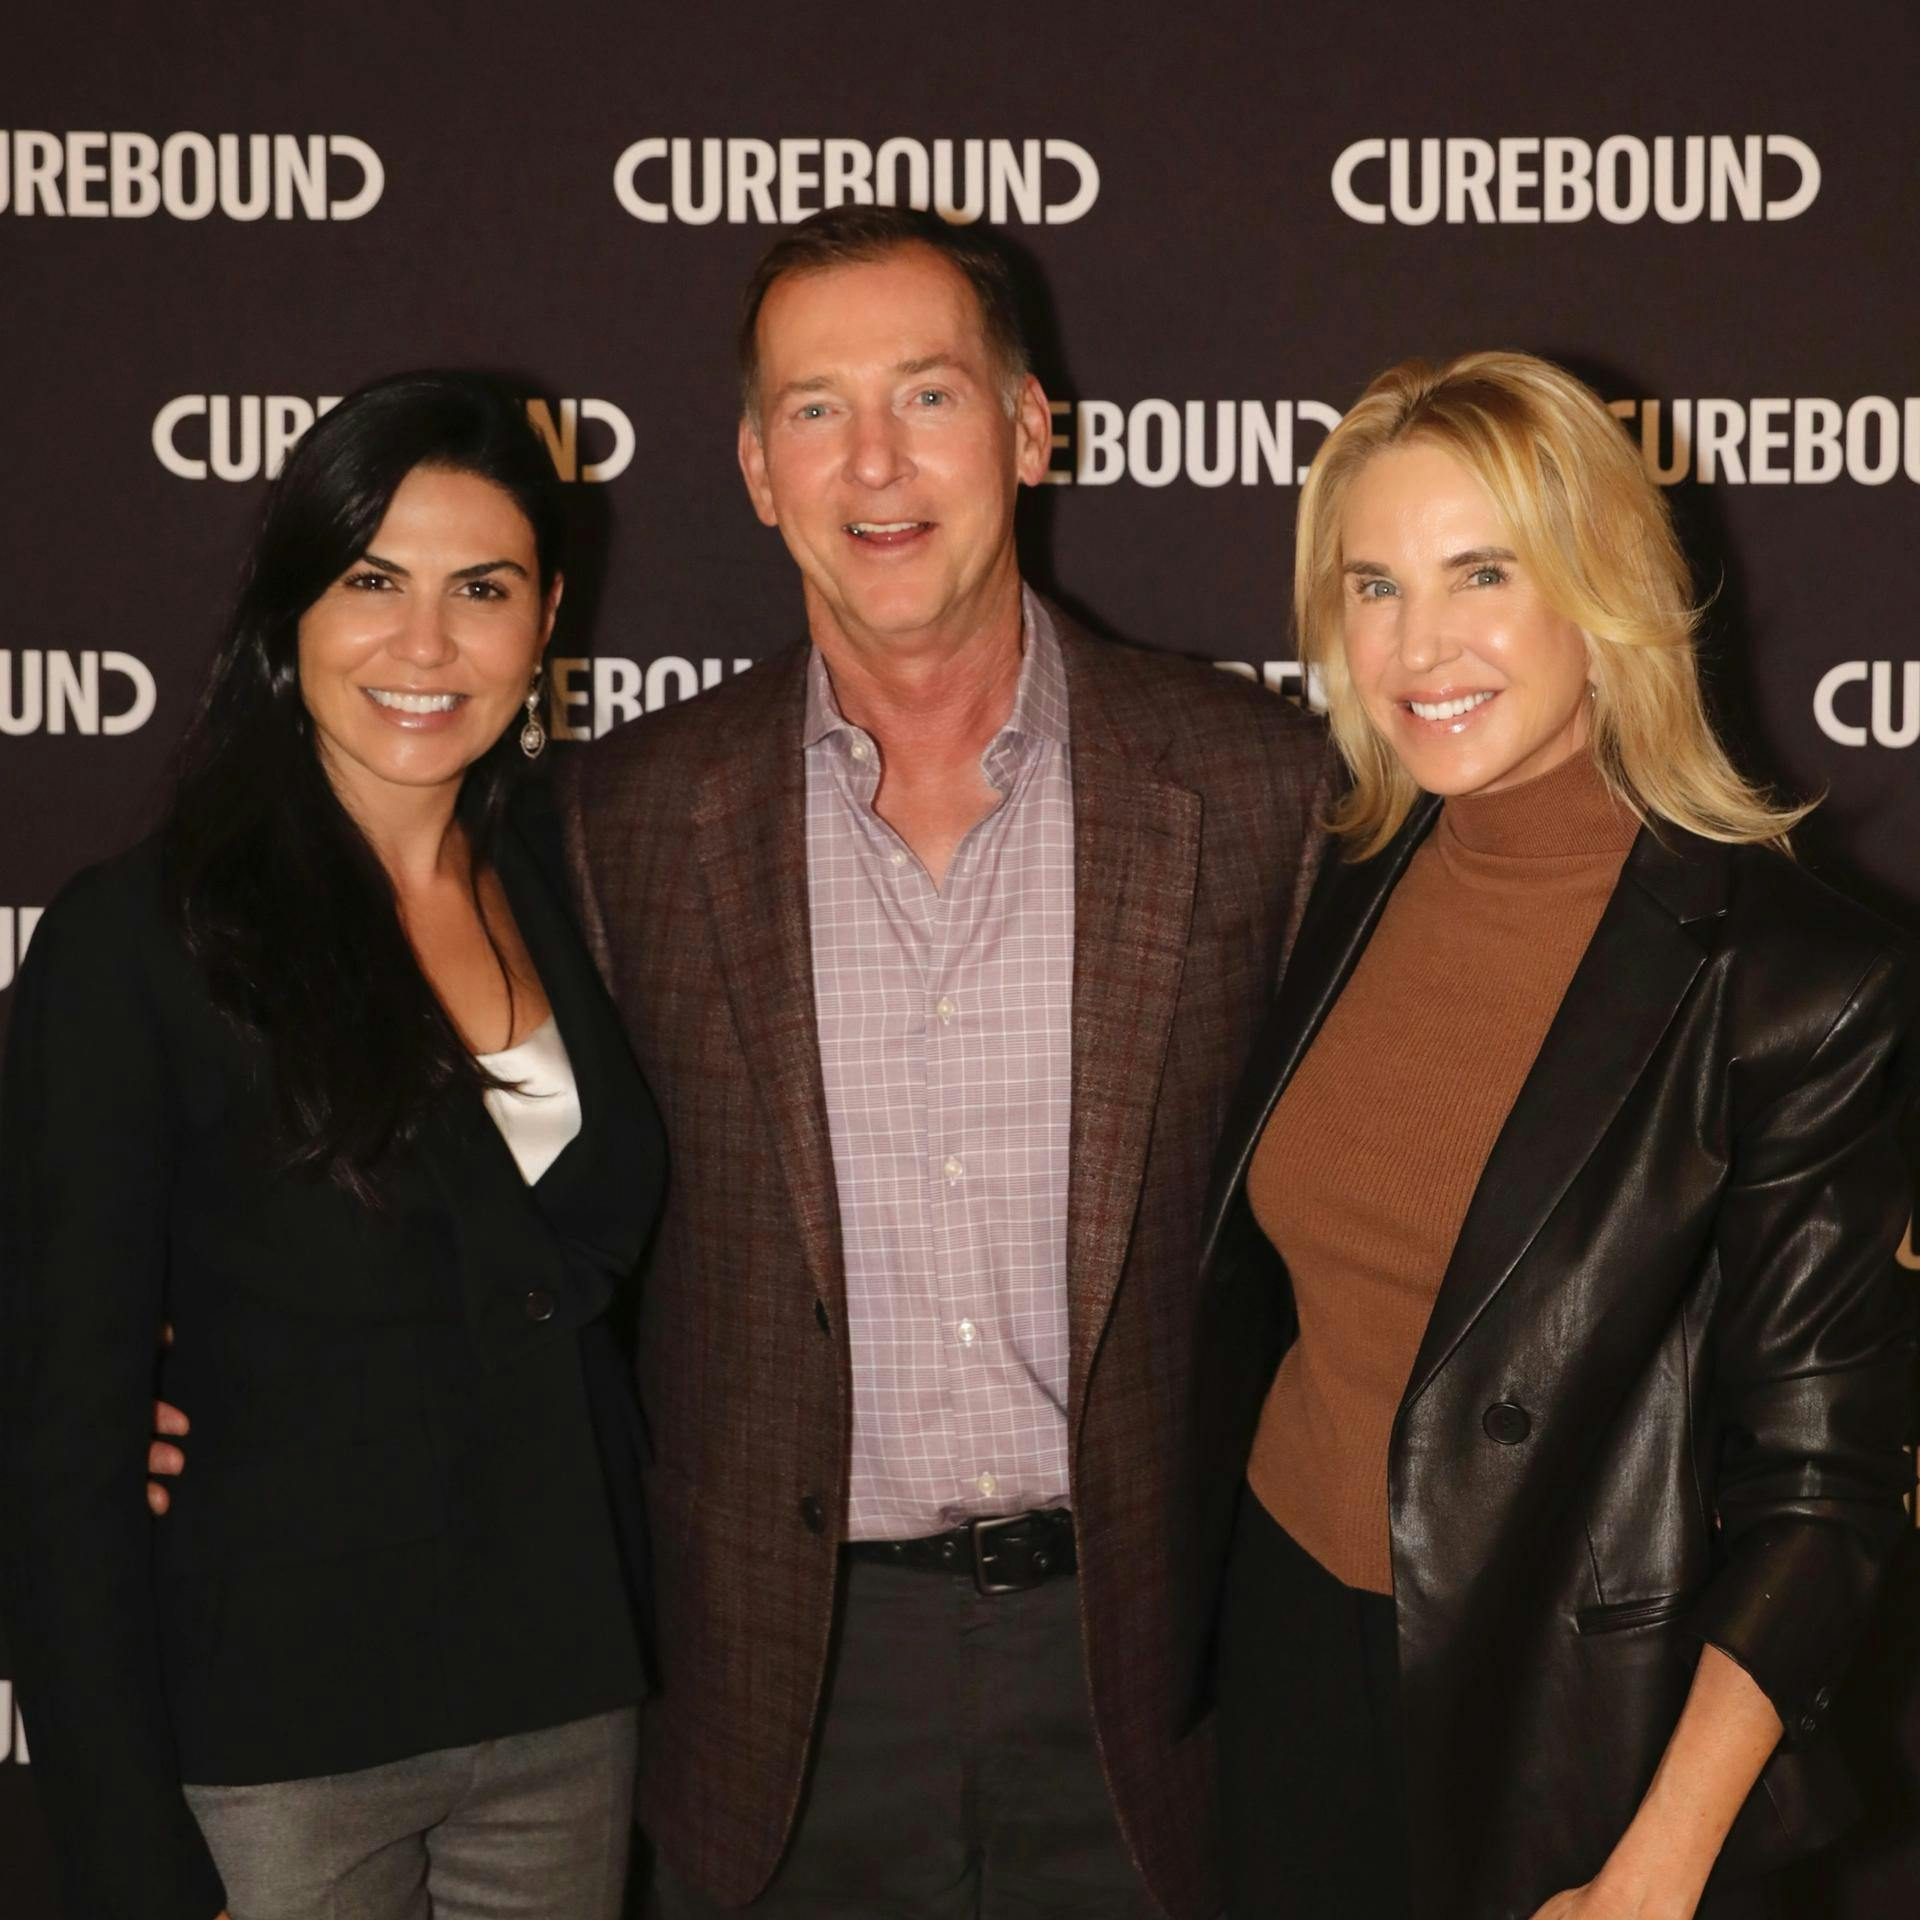 Curebound Launches and Commits to Invest $100 Million into Cancer Research undefined